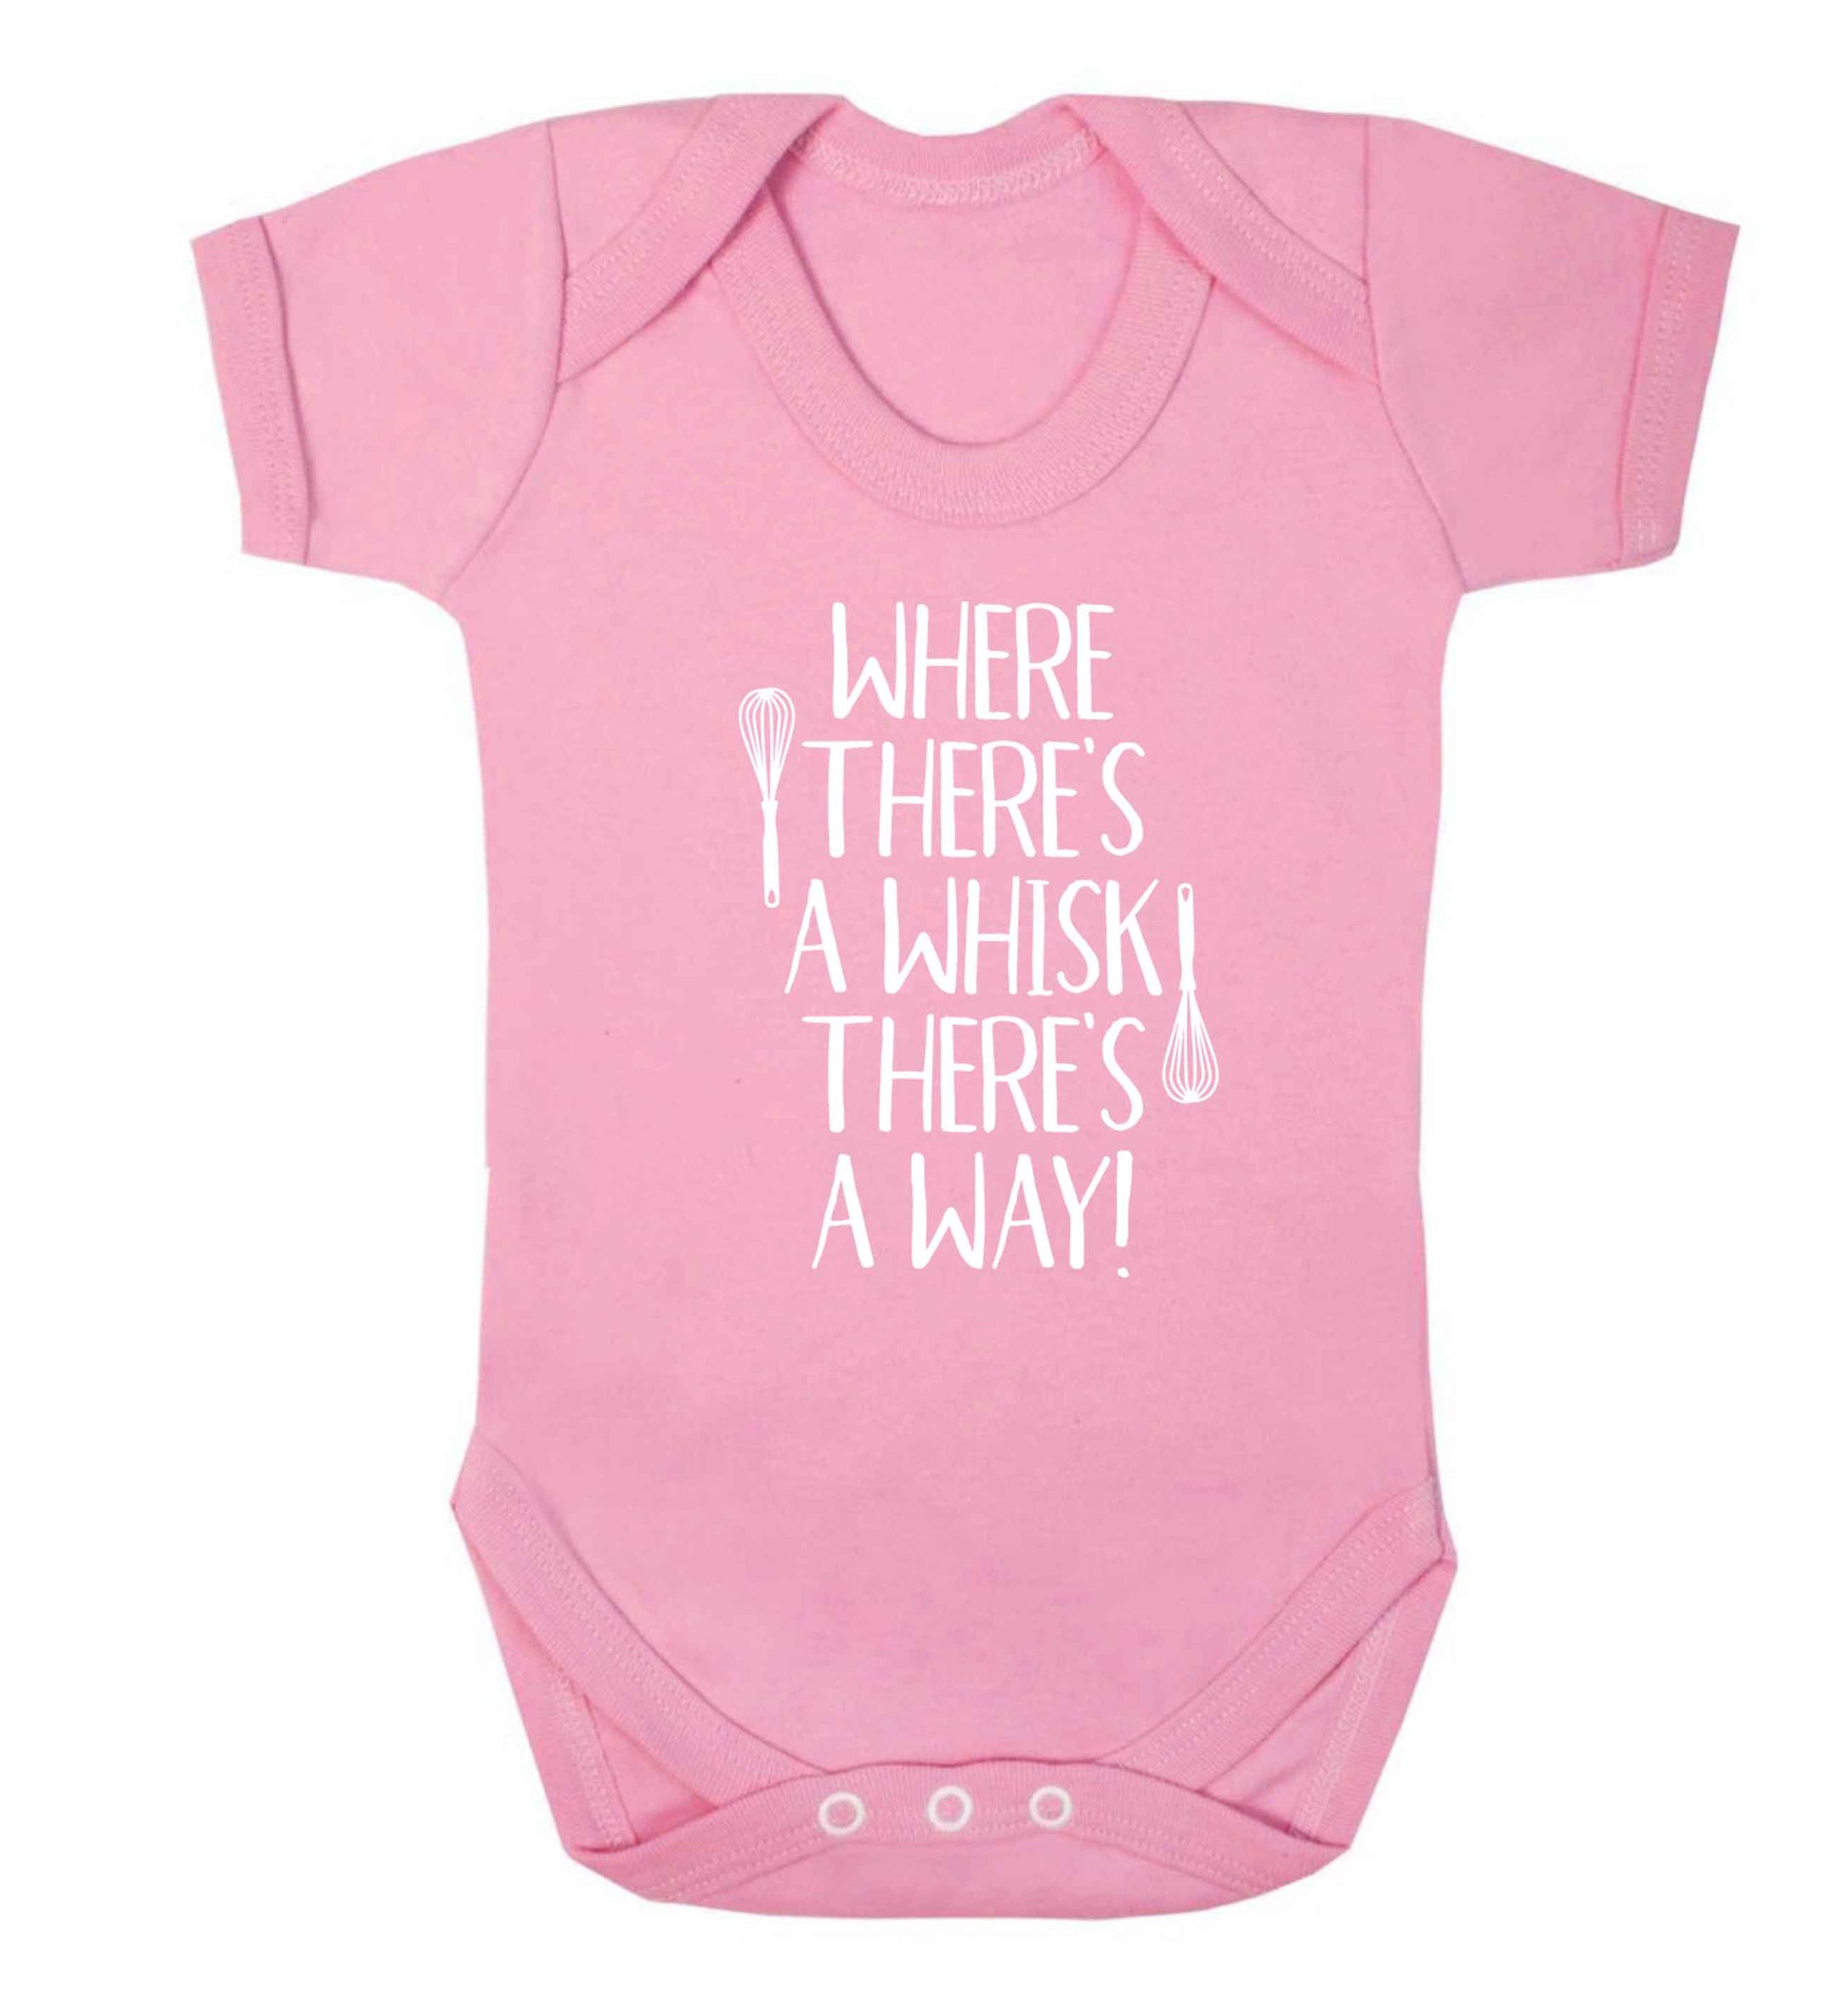 Where there's a whisk there's a way Baby Vest pale pink 18-24 months